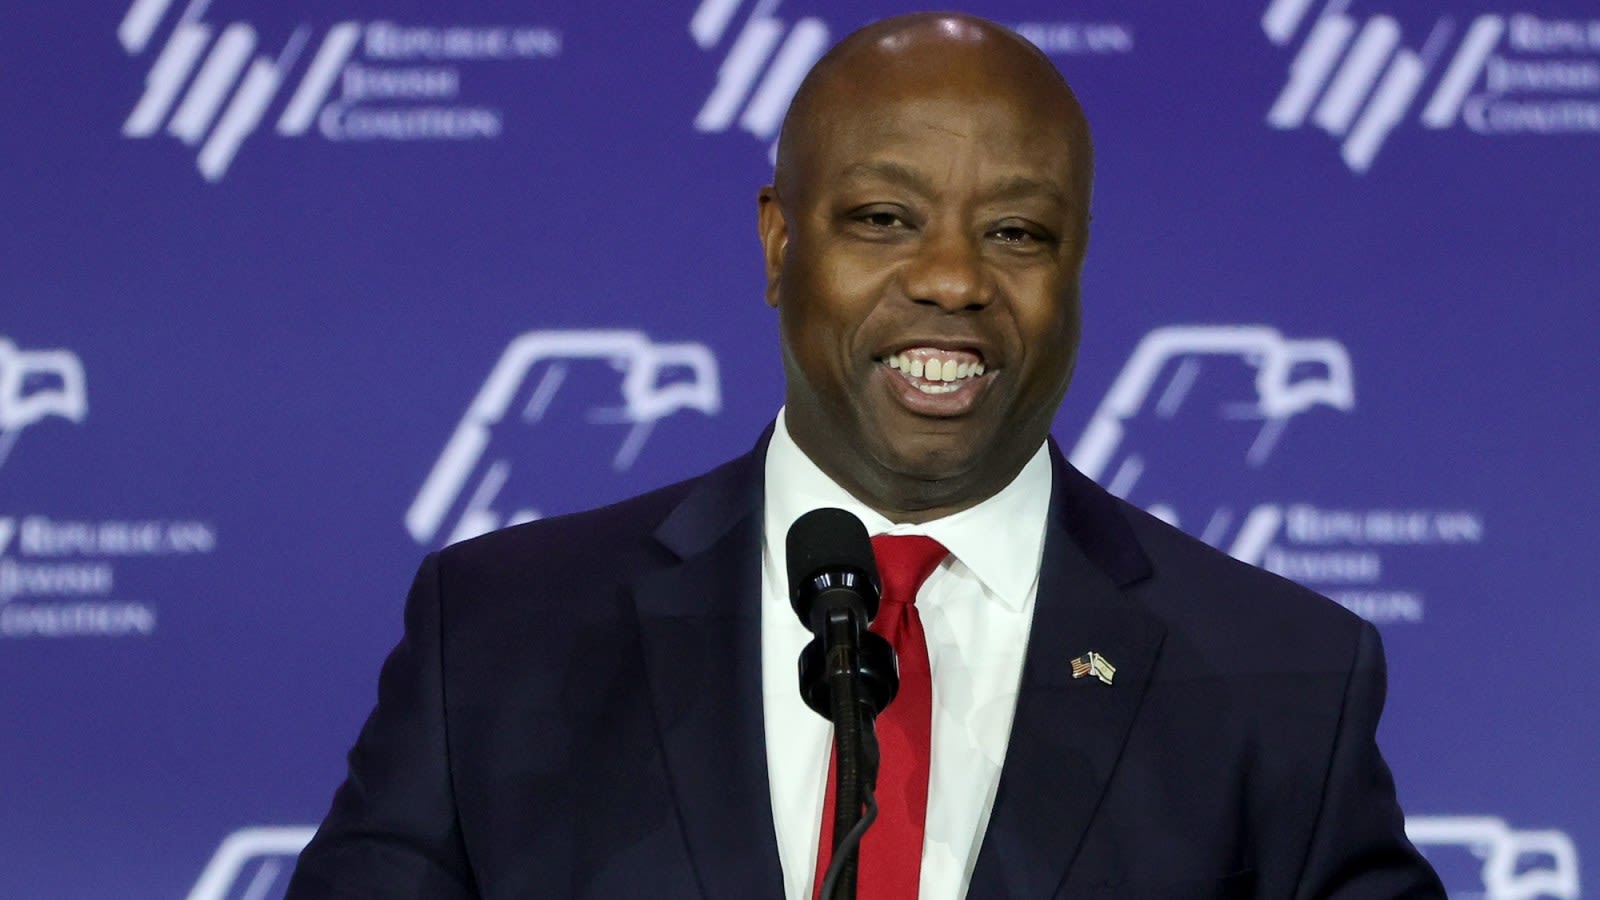 Tim Scott Embraces Trump's Election Denialism, Won't Commit to Accept Results